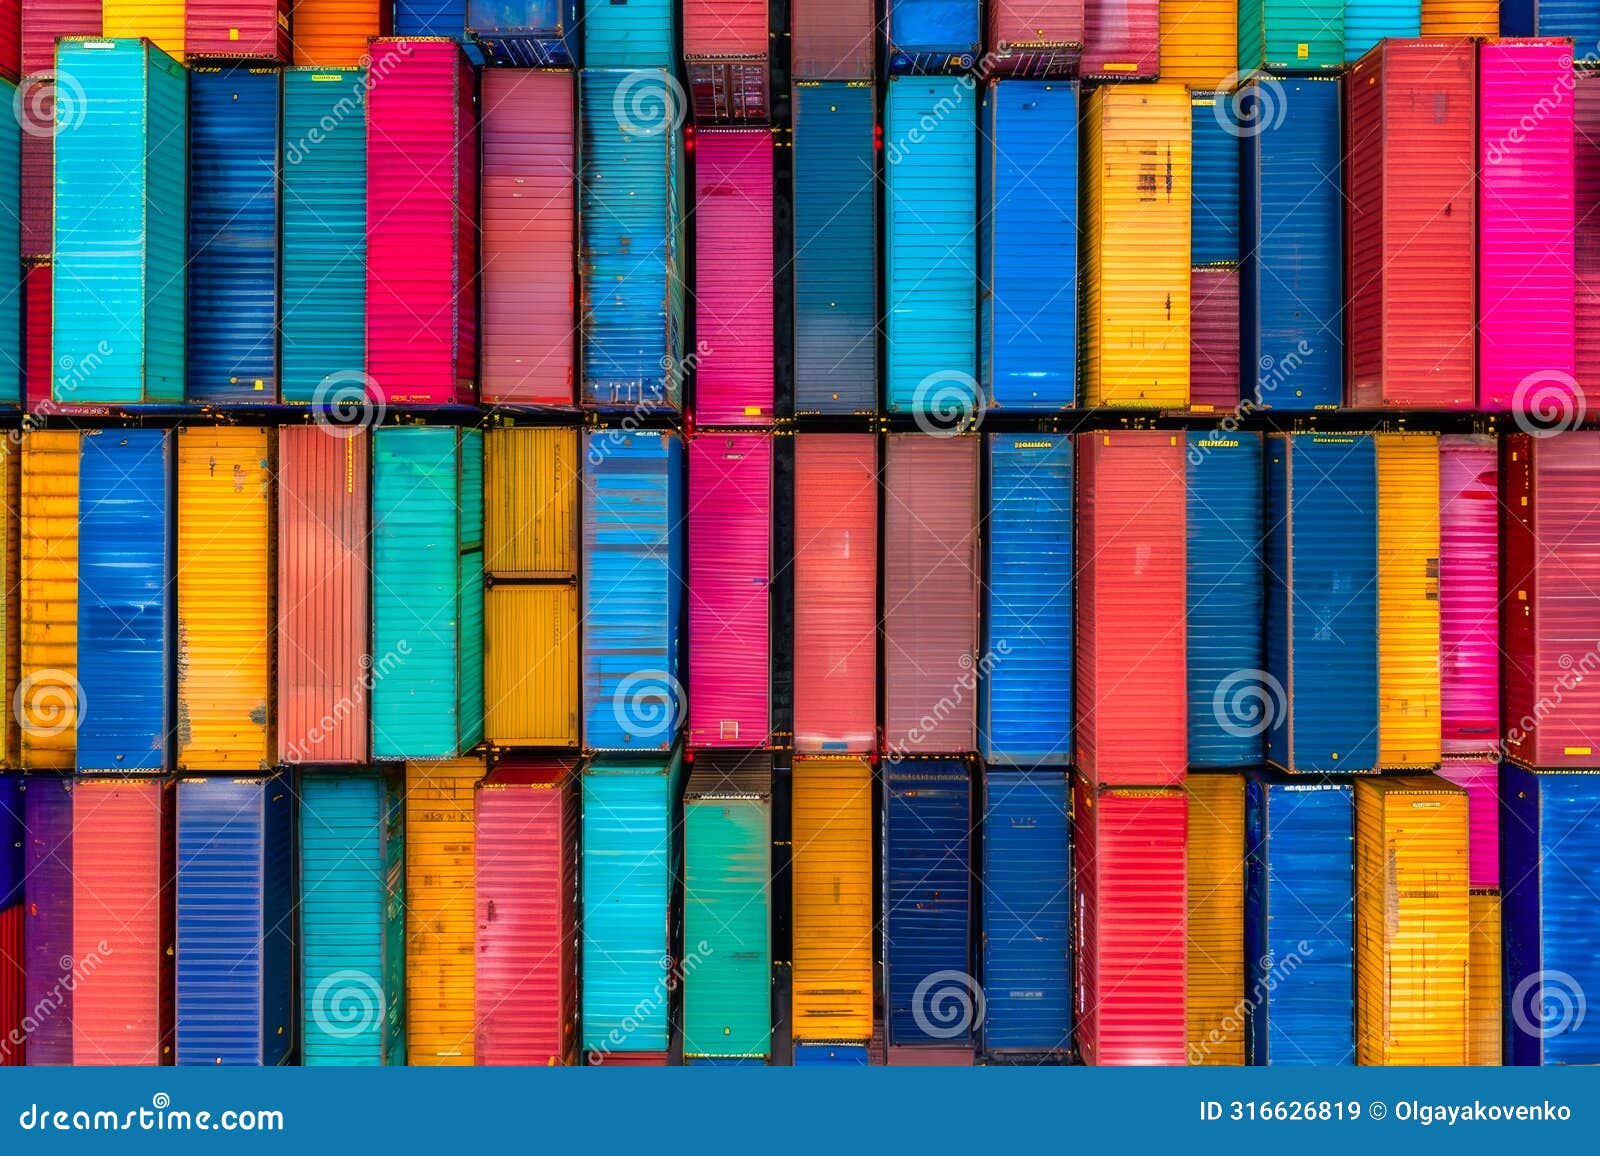 colorful roofs of cargo containers, logistics hub, transportation and delivery of railway cargo, top view